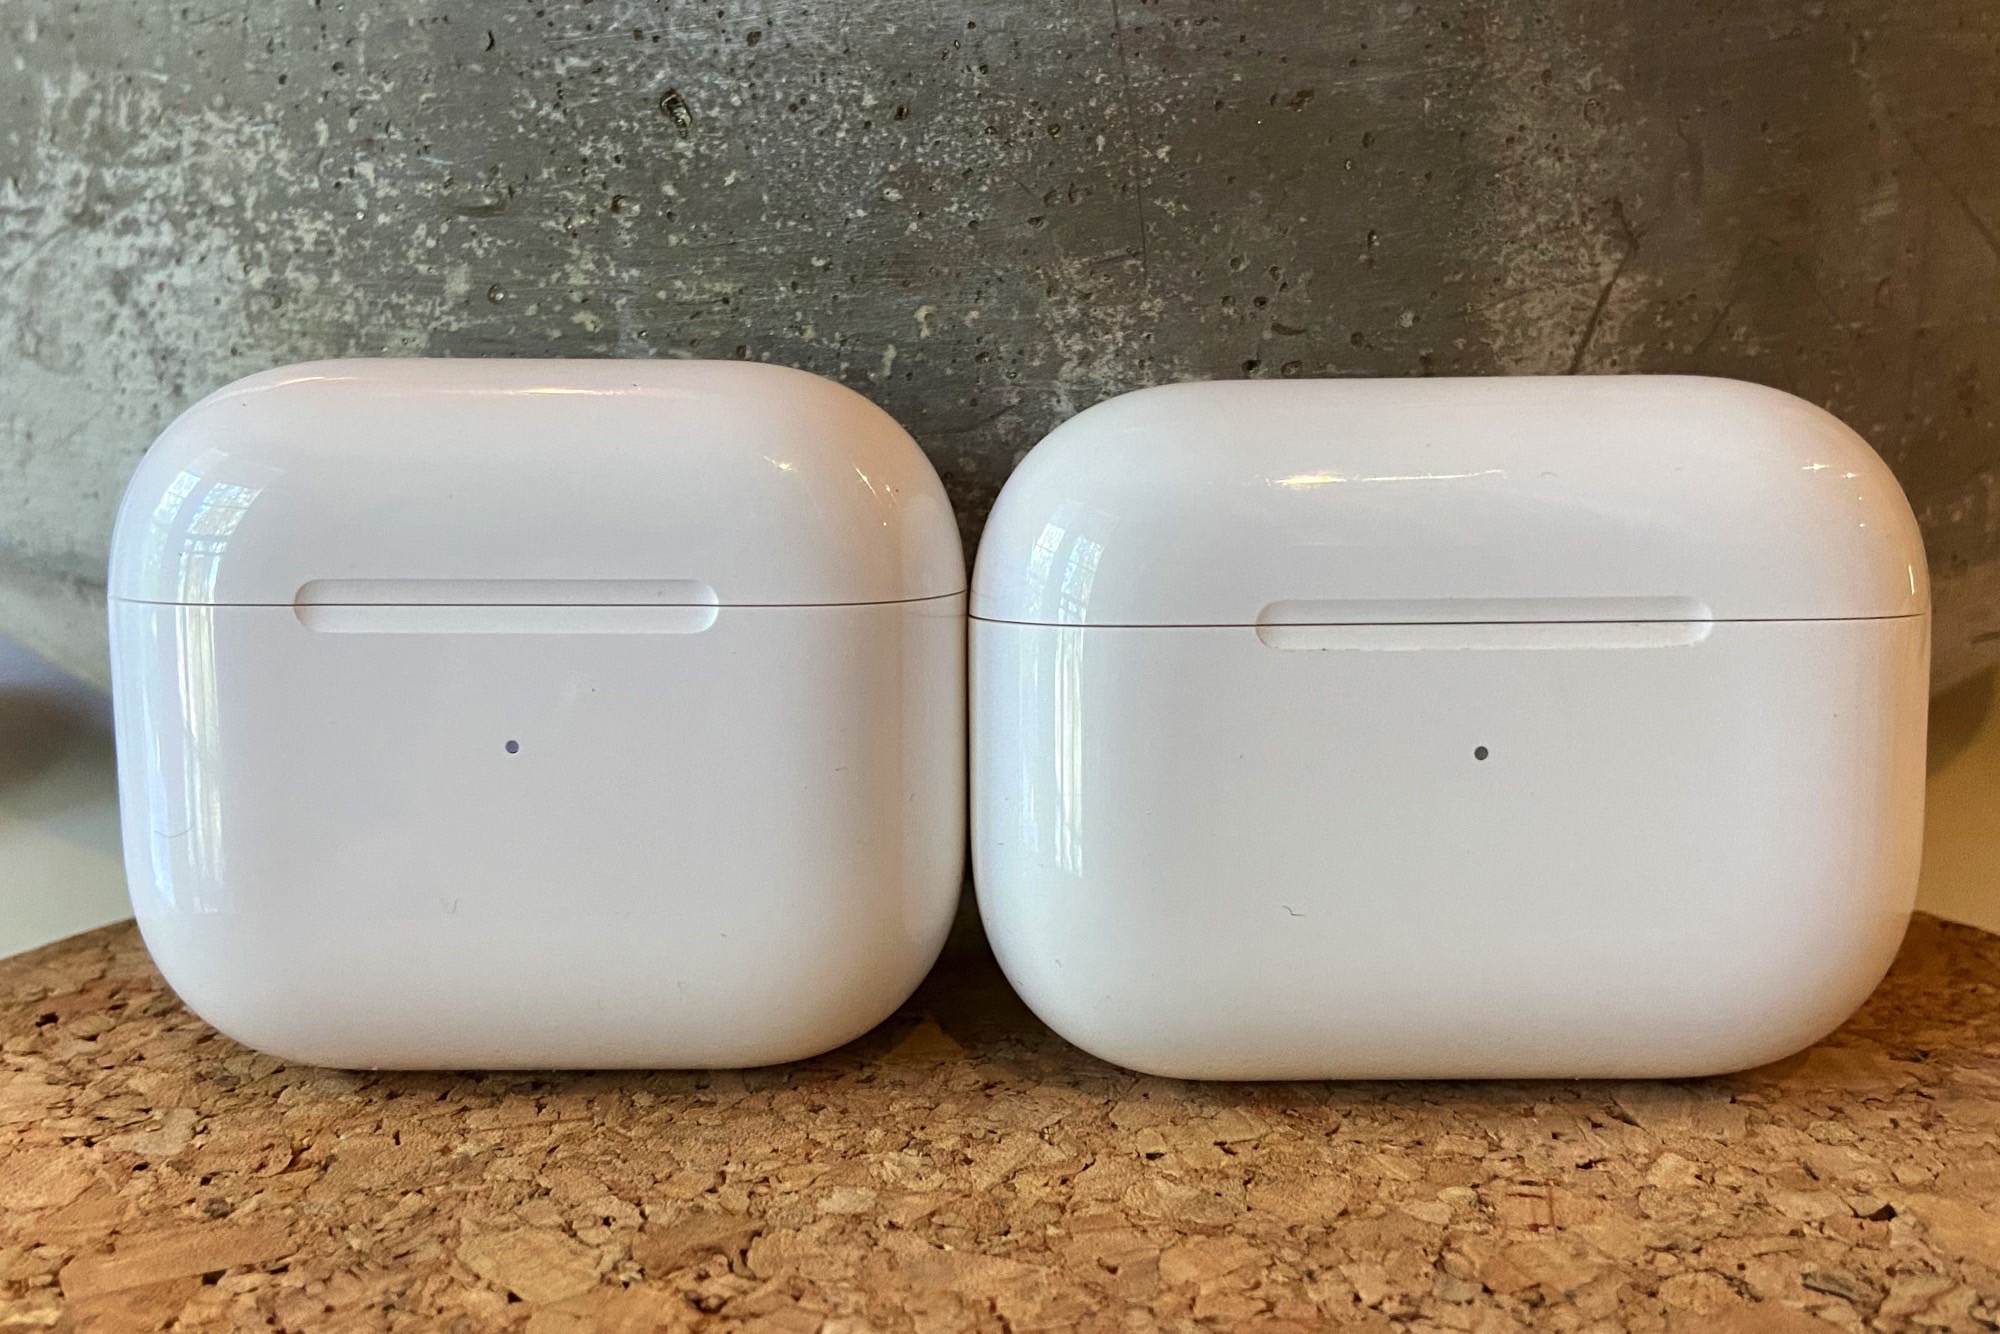 apple airpods 3 review 00023